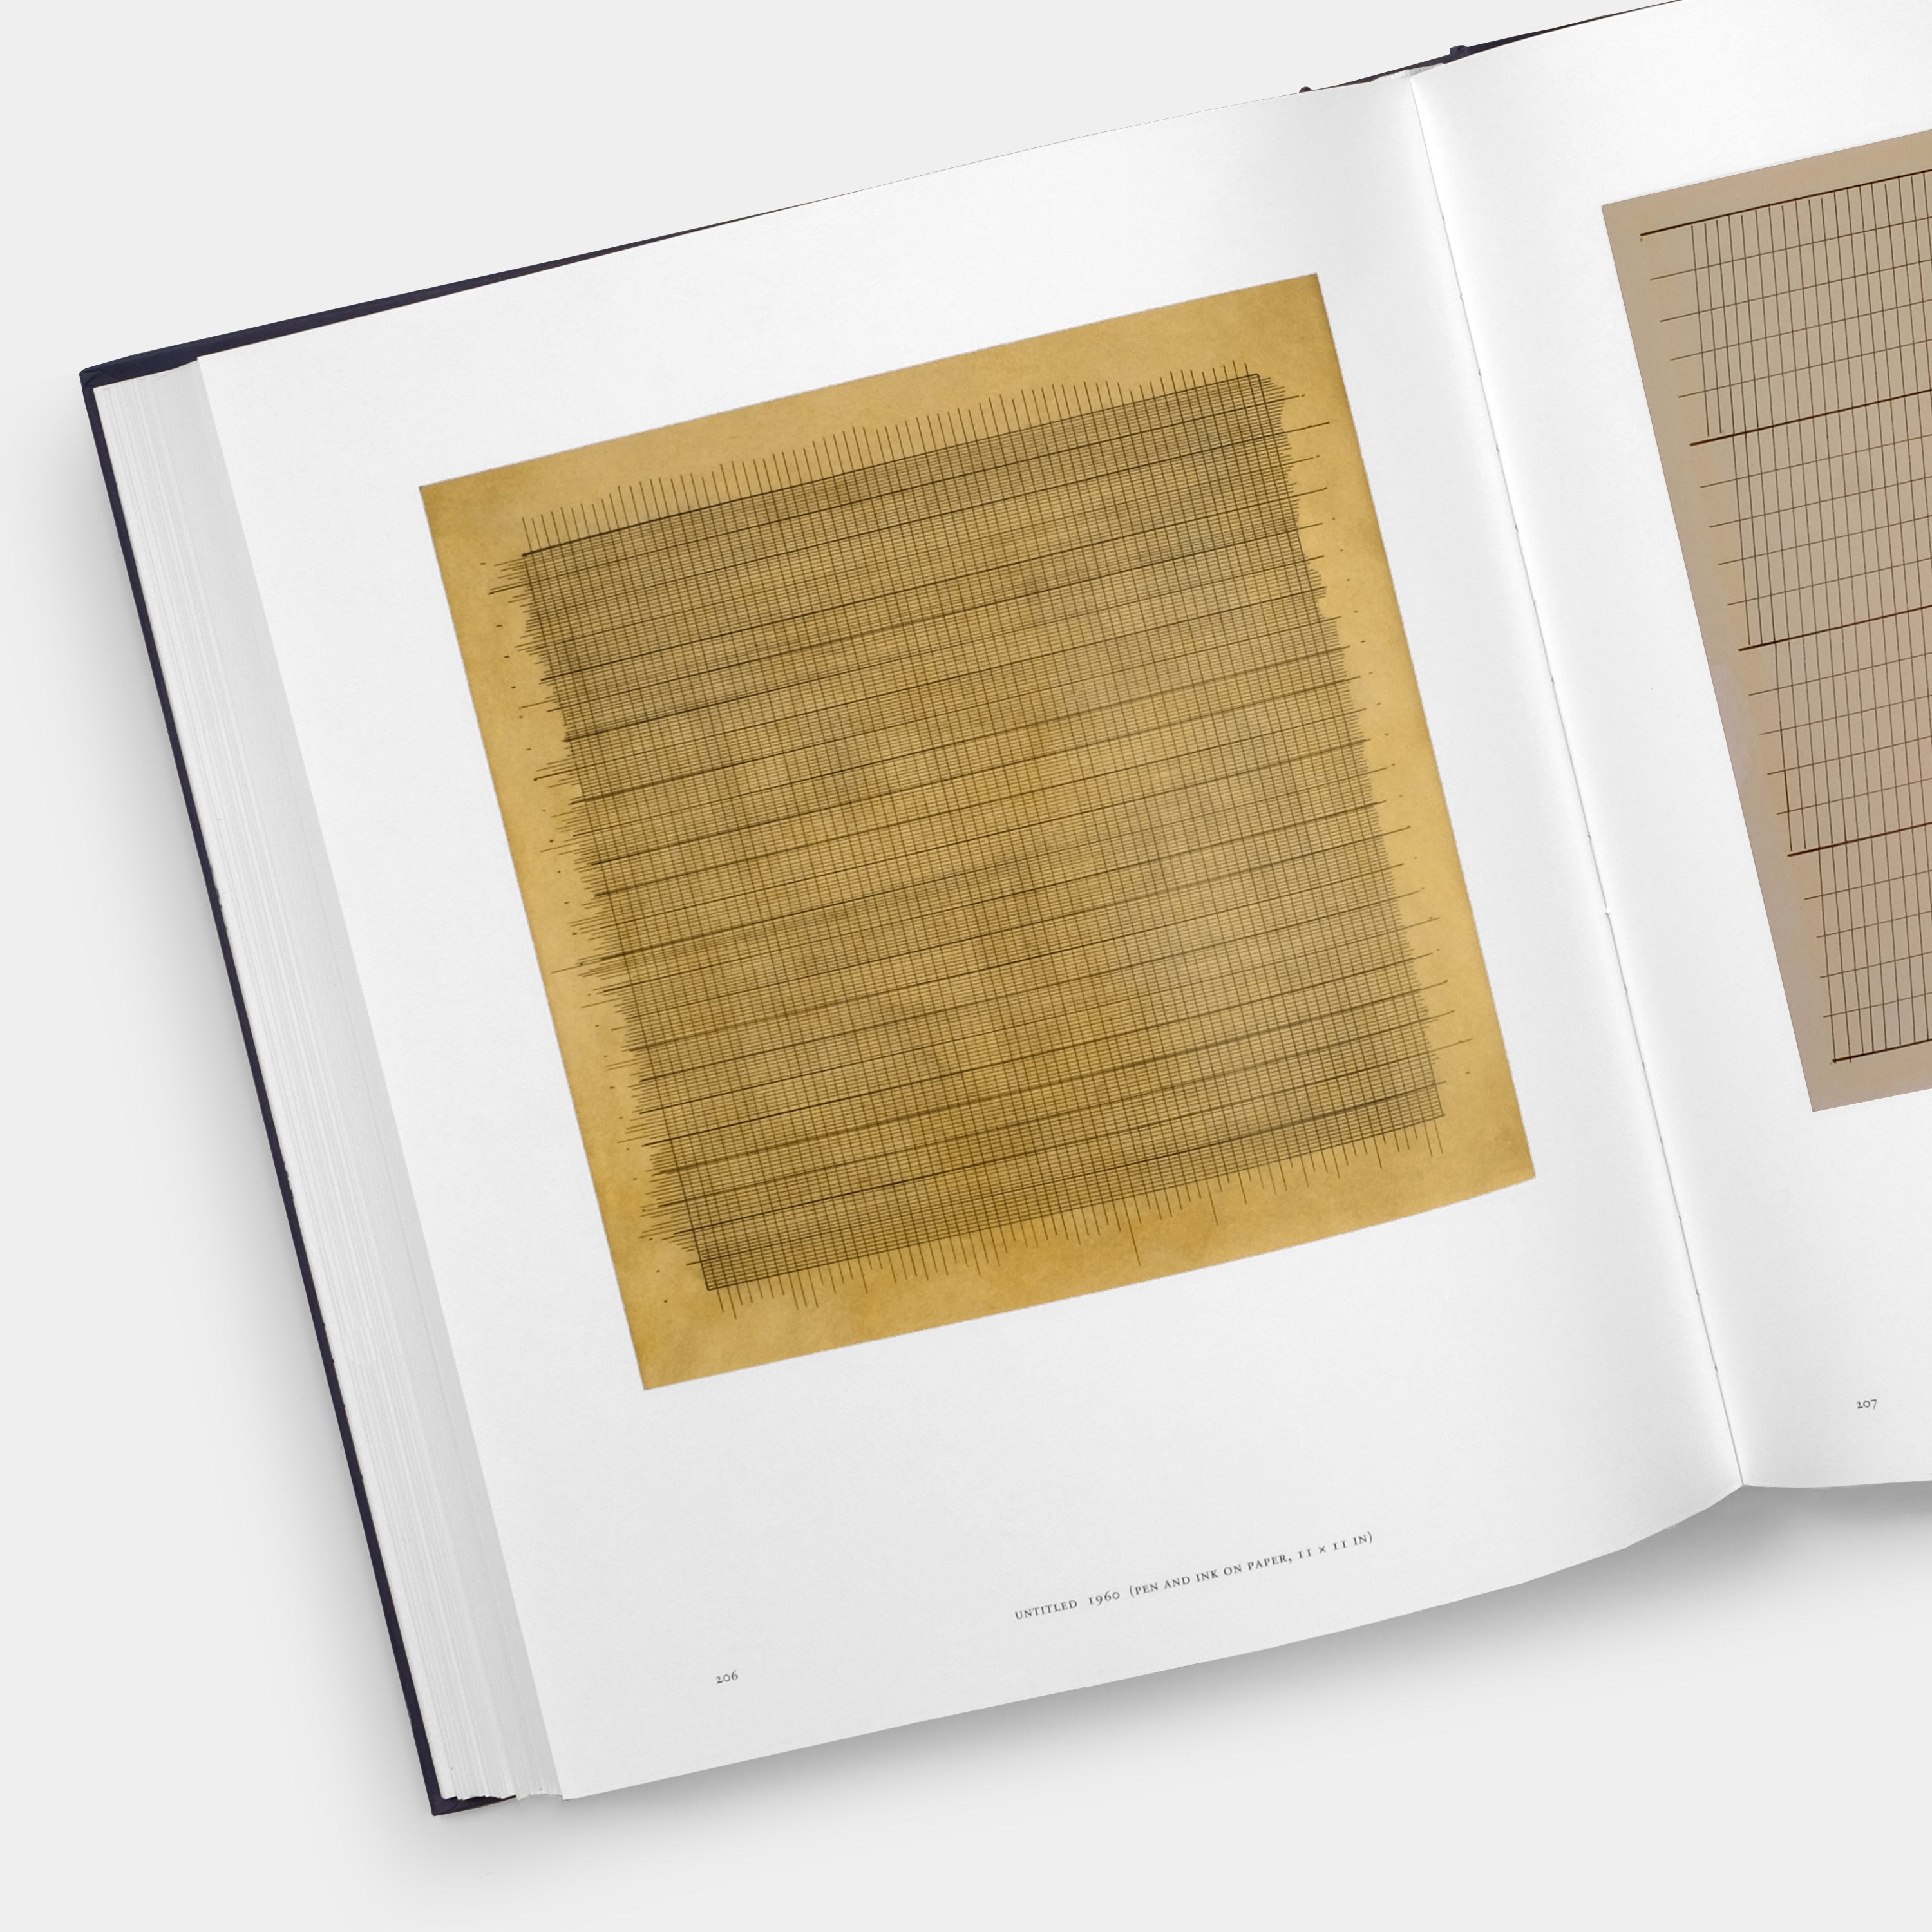 Agnes Martin: Painting, Writings, Remembrances by Arne Glimcher Phaidon Book